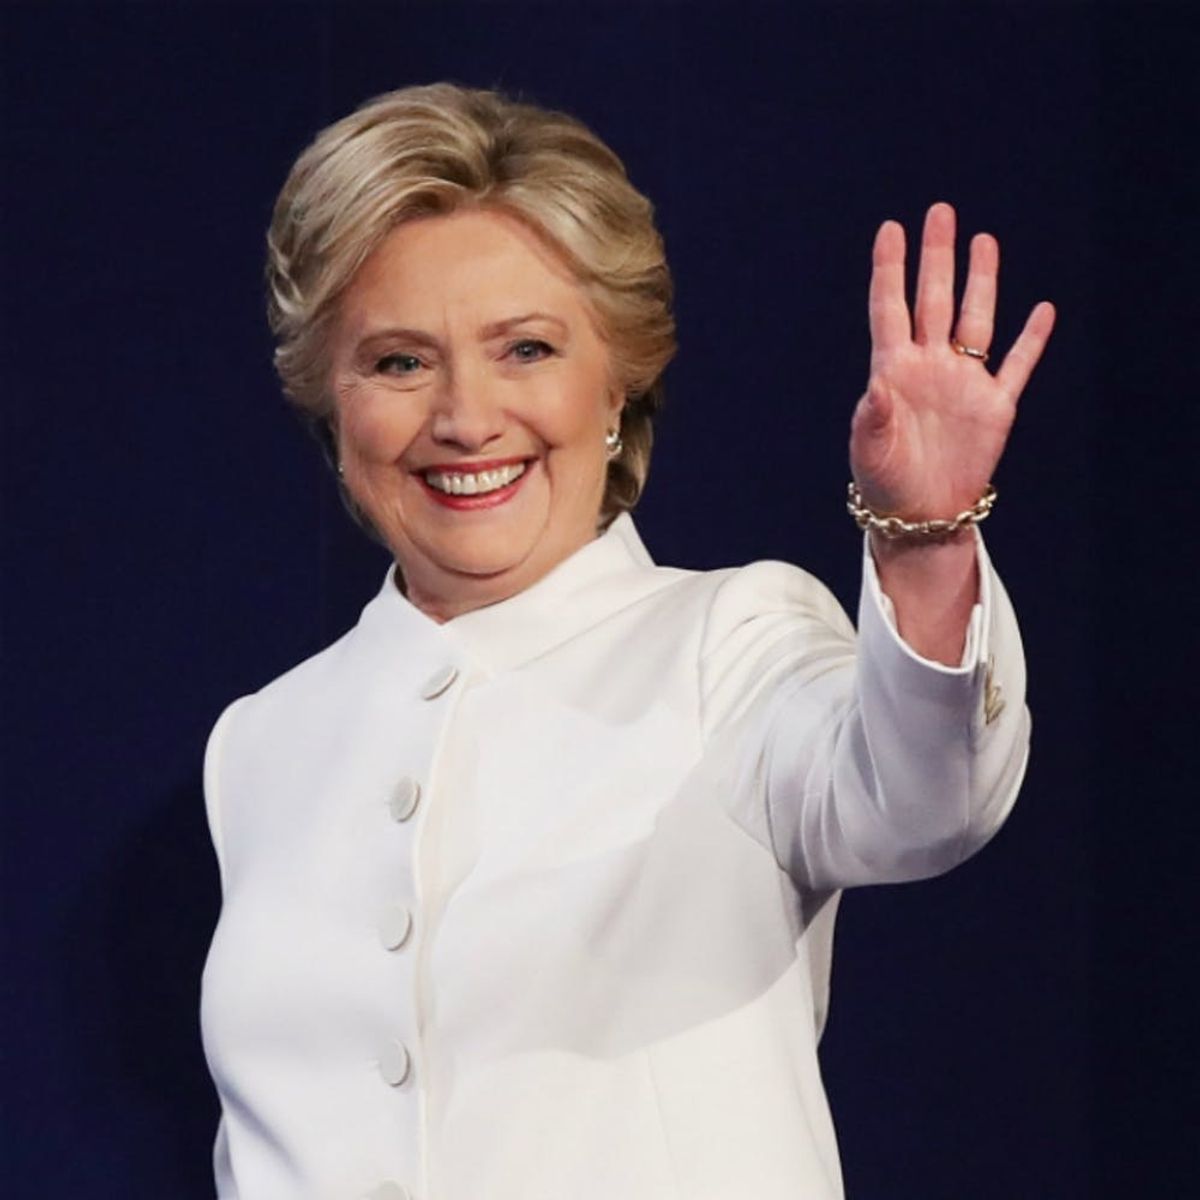 Hillary’s Debate Pantsuit Was a Statement About Women’s Rights